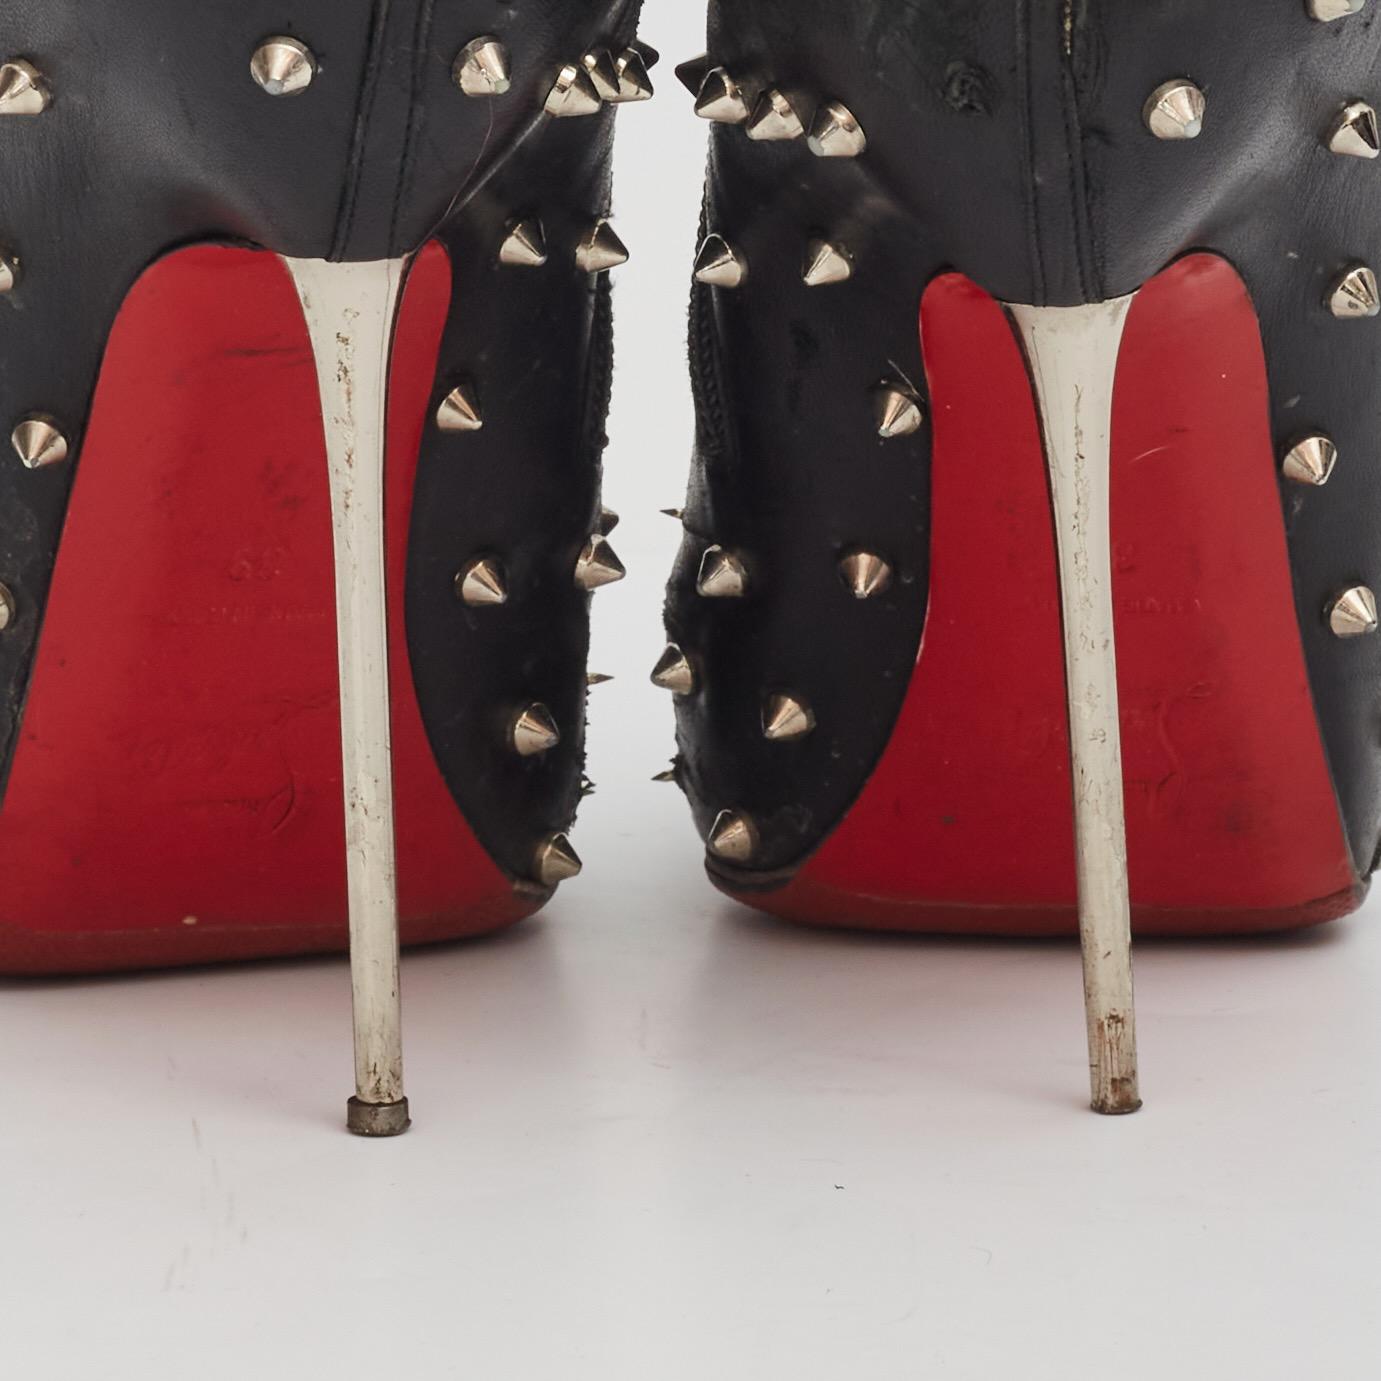 Christian Louboutin Studded Black Leather Booties (EU 39  US 8) In Good Condition For Sale In Montreal, Quebec